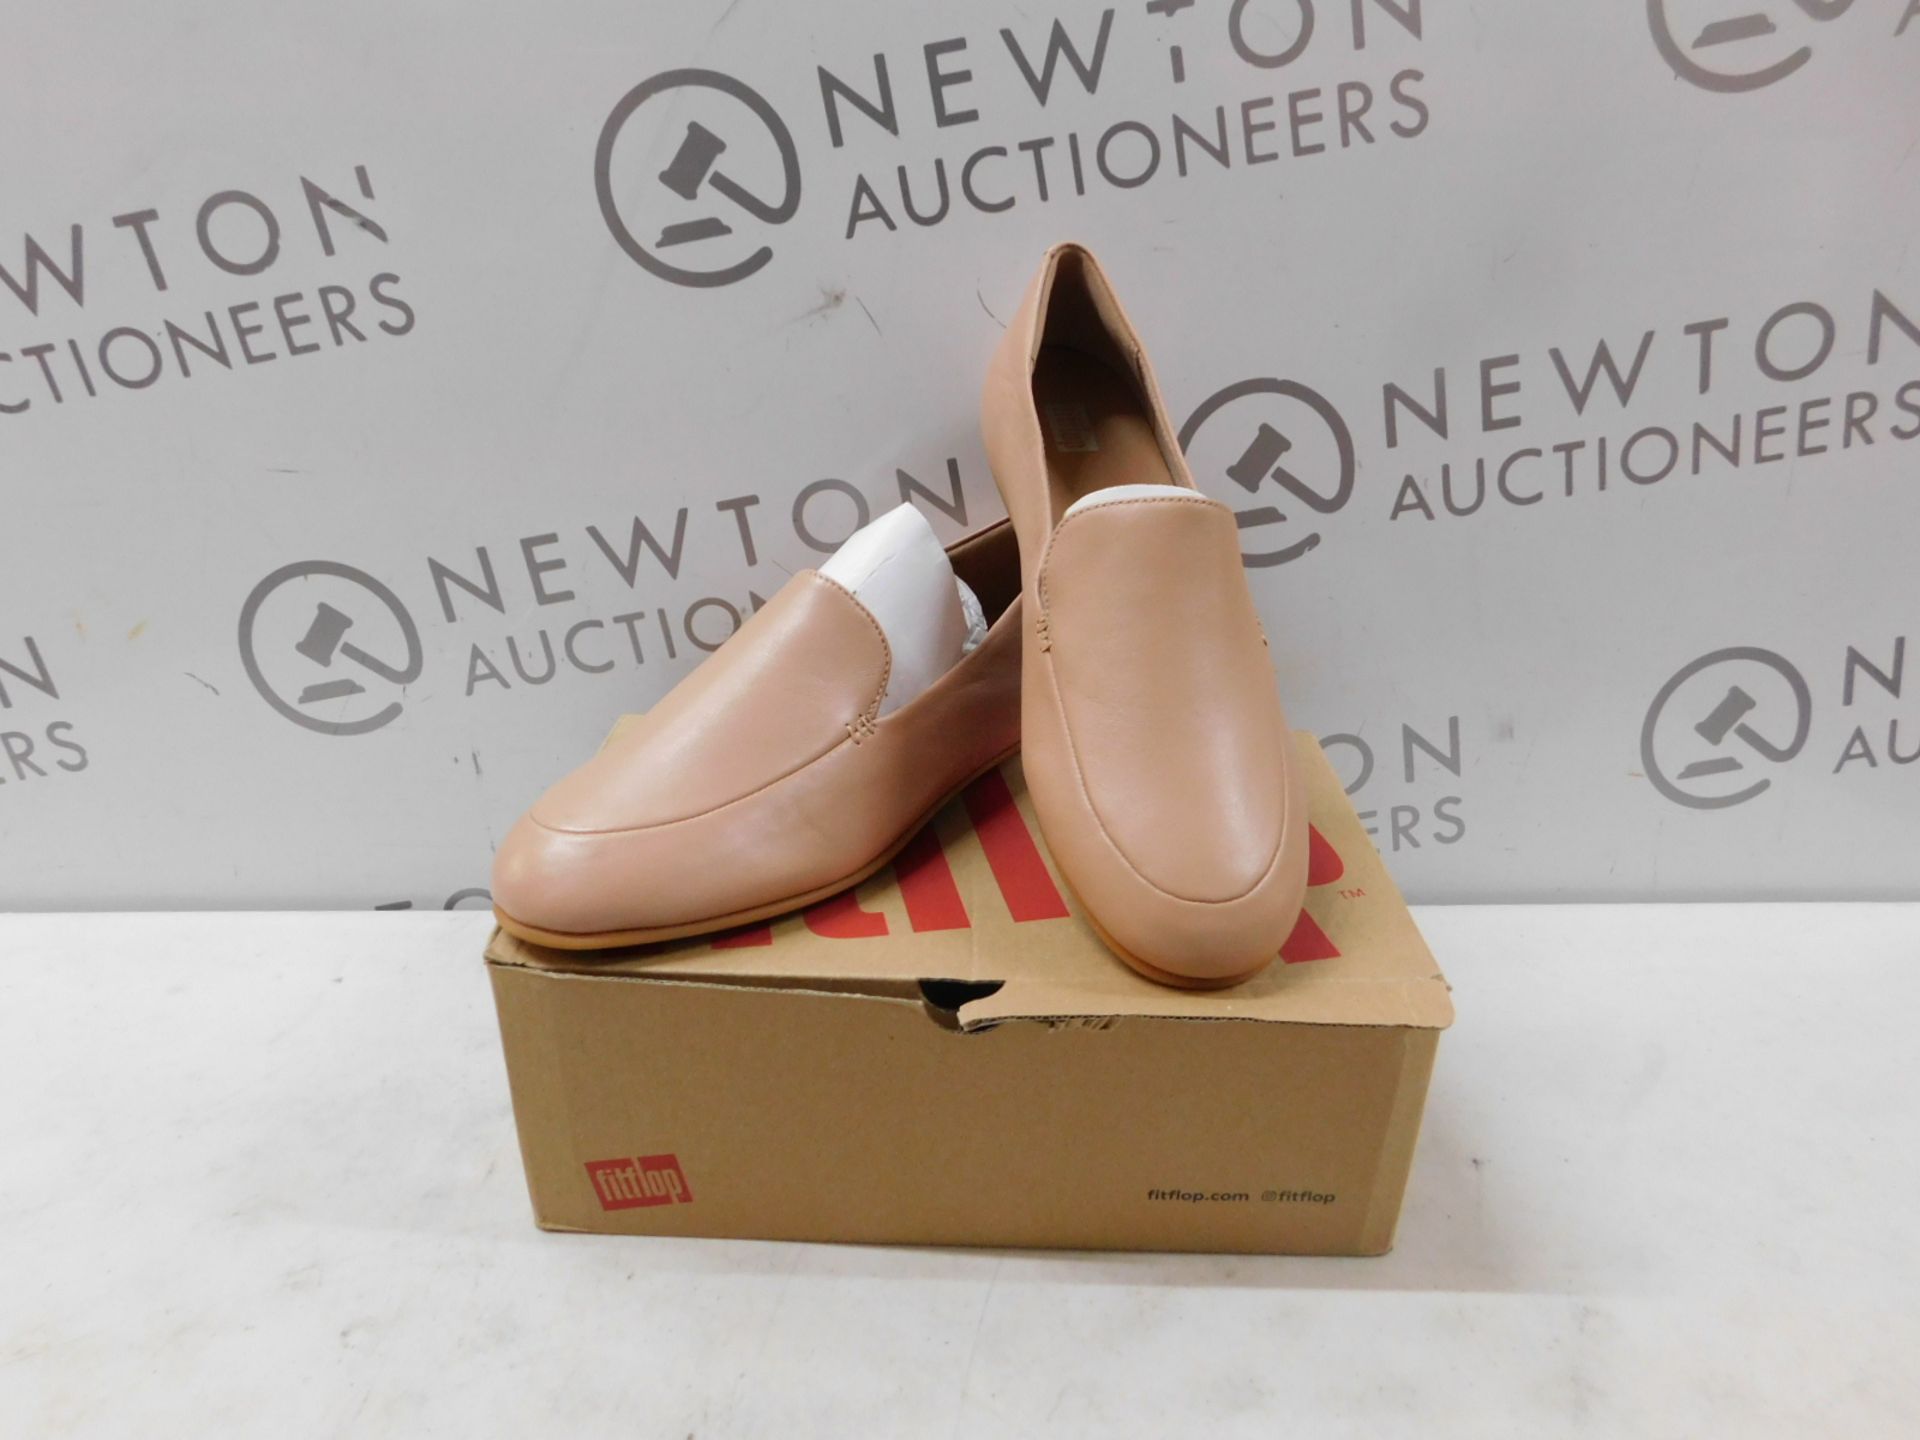 1 BRAND NEW BOXED PAIR OF FITFLOP LADIES LENA LEATHER LOAFERS UK SIZE 6 RRP Â£60